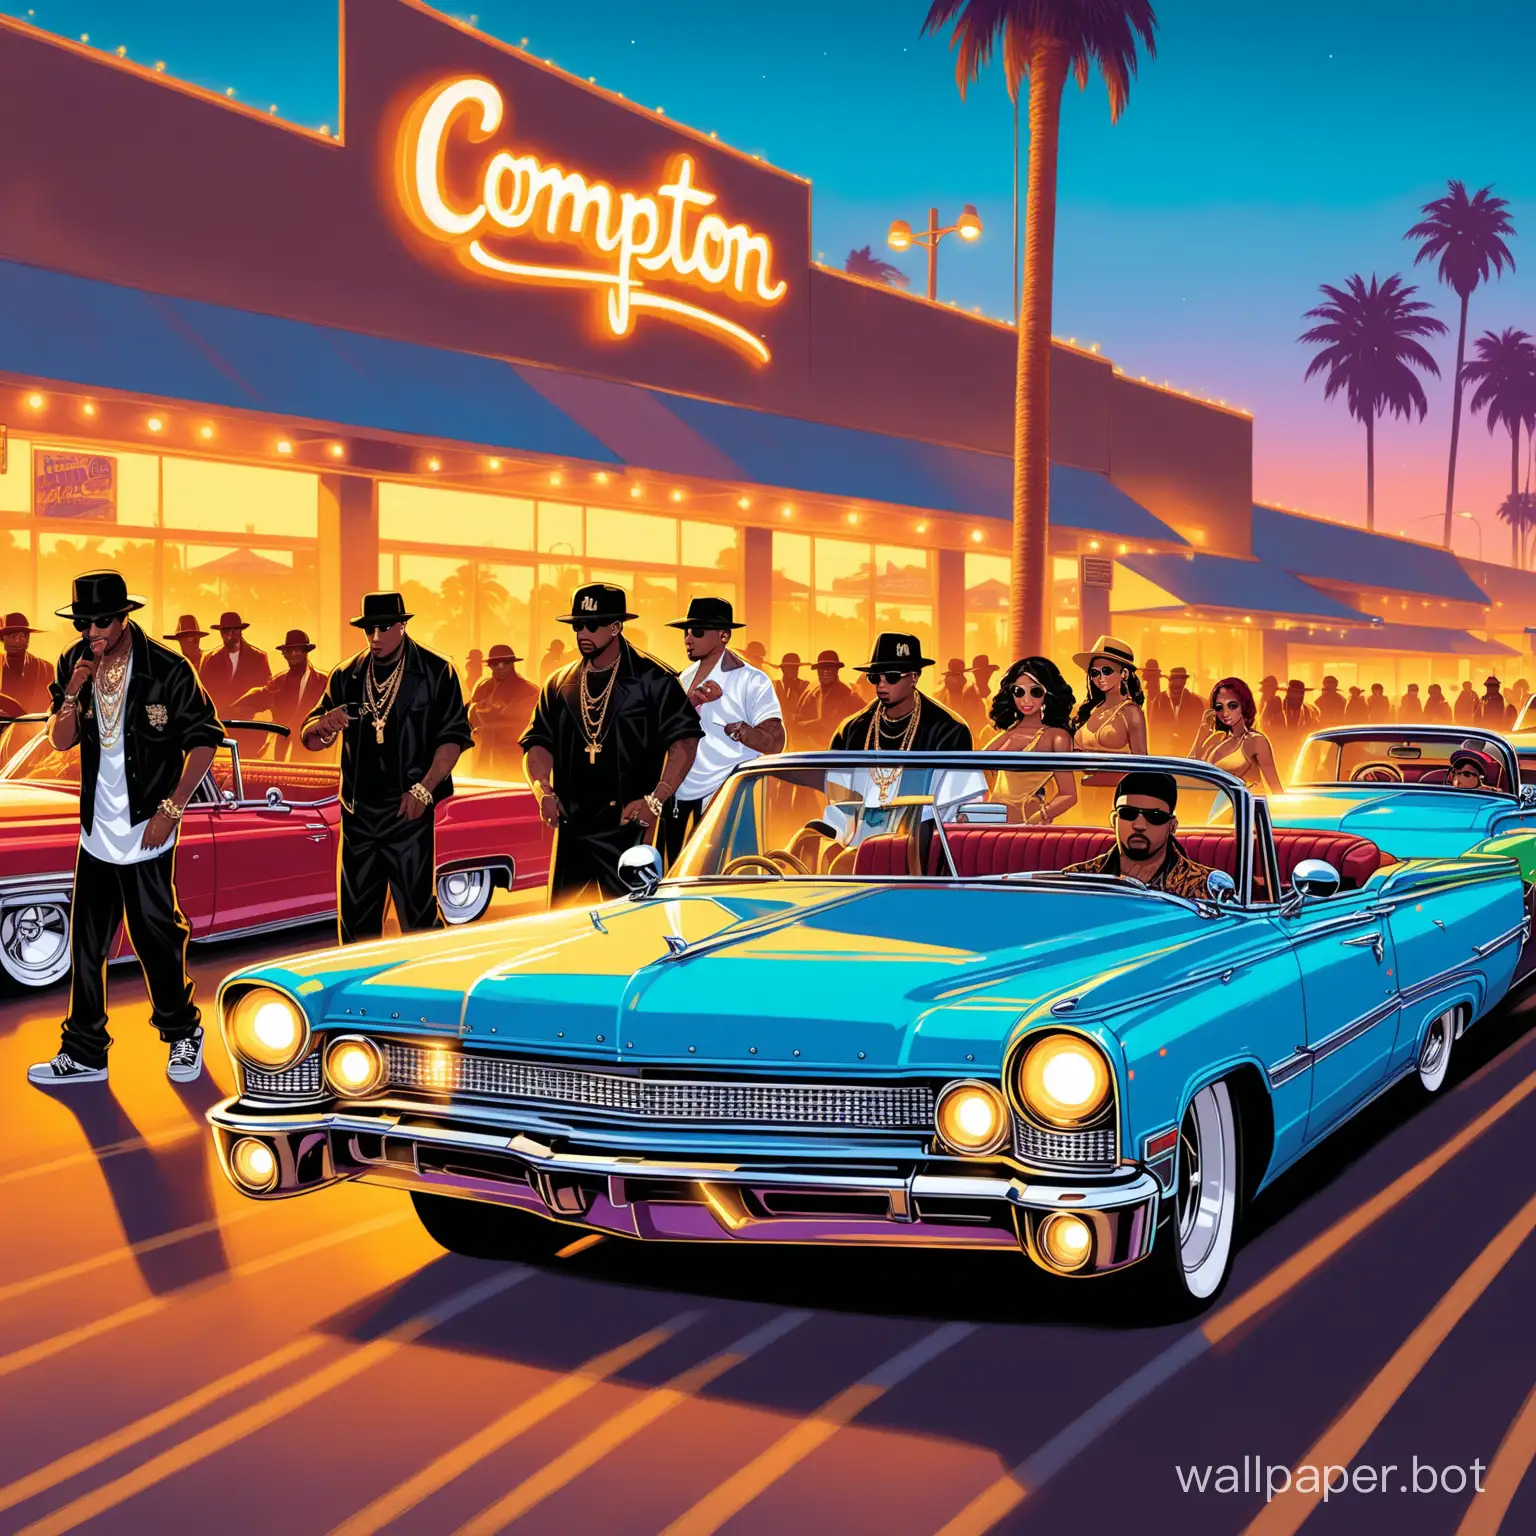 a busy Car Cruise with   groups of boys and girls dressed in hip hop clothes driving low Rider Cars with low rider  bikes in the background location - Compton LA, late evening  (hip hop / Funk / gangster ) - illustration